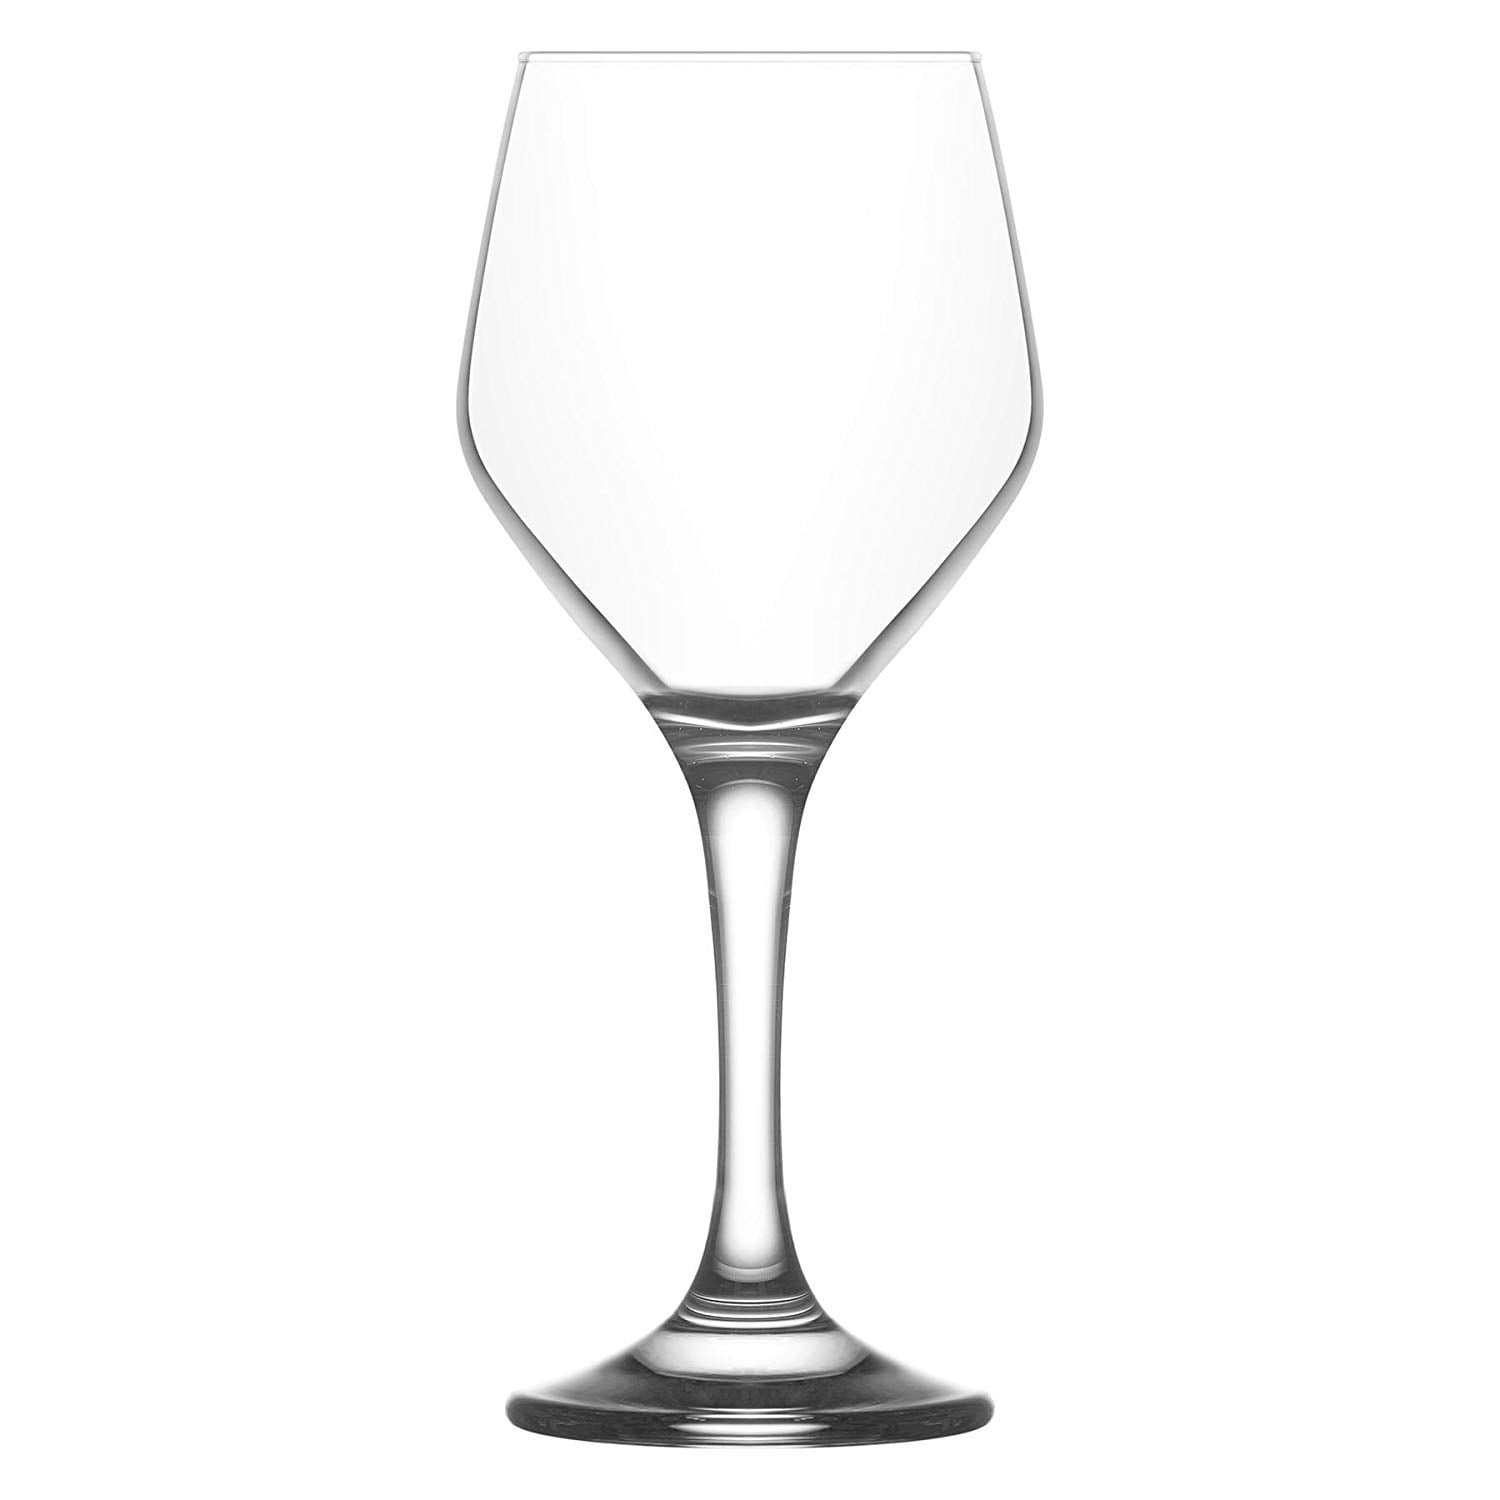 Vikko 12.75 Ounce Wine Glasses | Beautifully Shaped – Thick and Durable  Construction – For Parties, …See more Vikko 12.75 Ounce Wine Glasses 